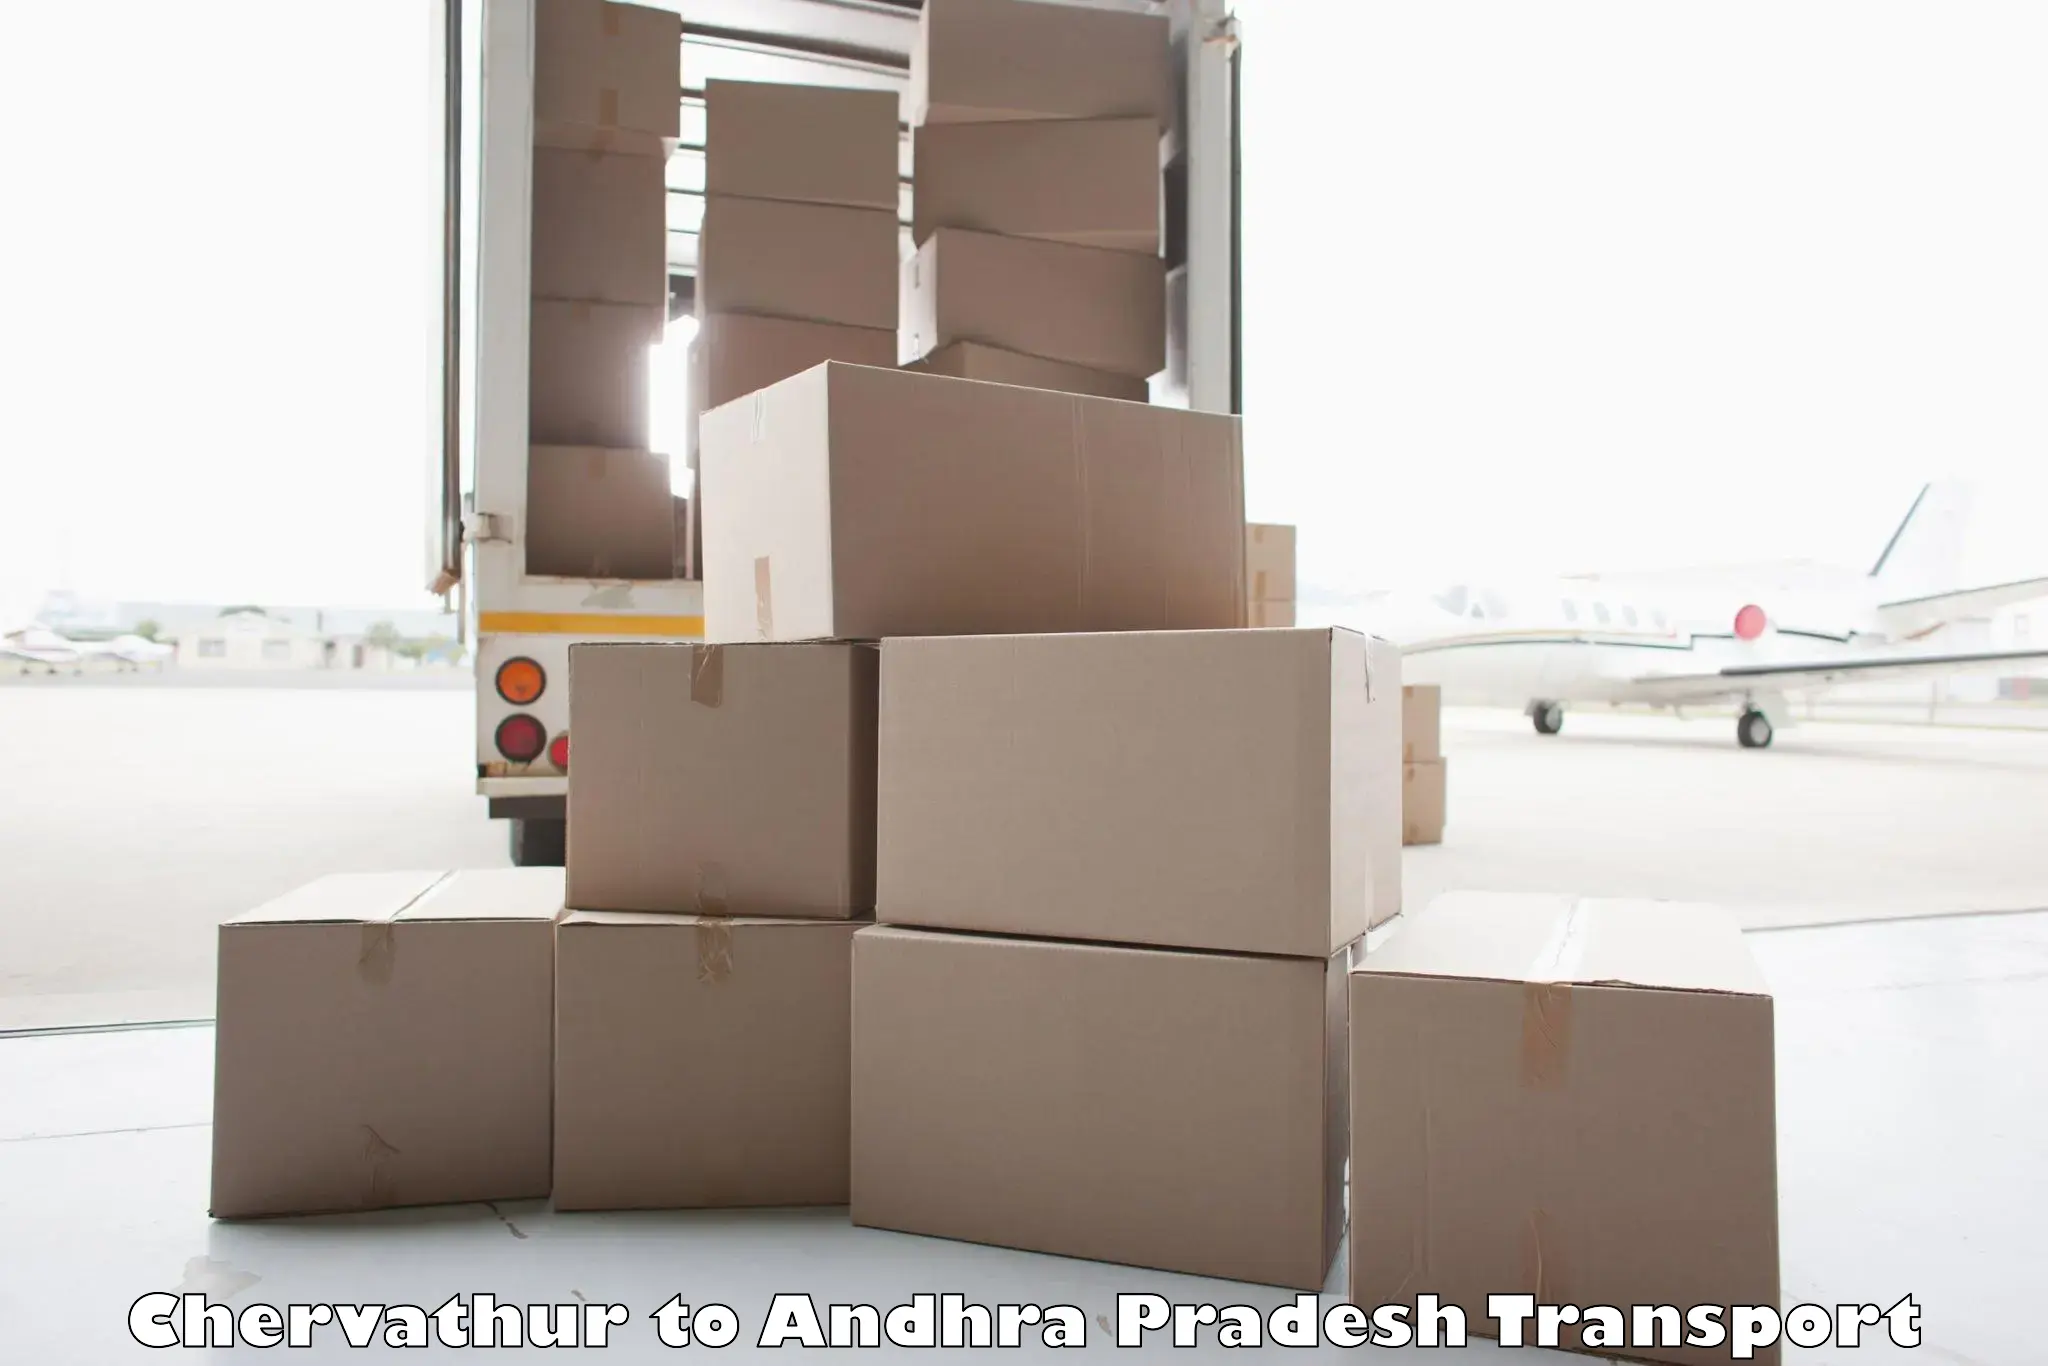 Air freight transport services Chervathur to Andhra Pradesh